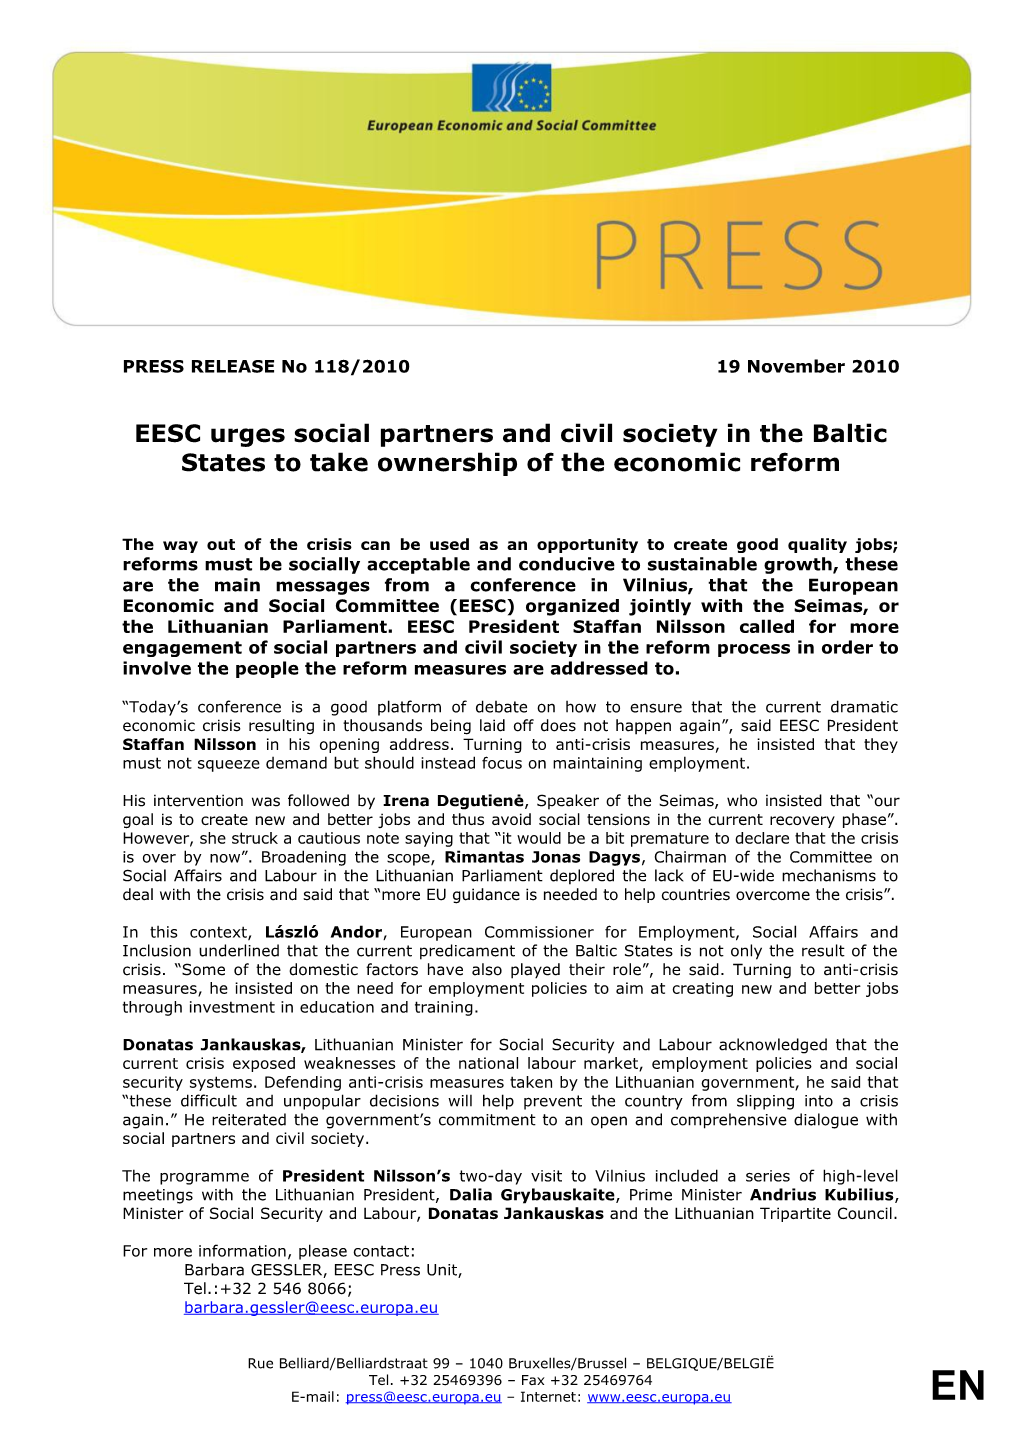 EESC Urges Social Partners and Civil Society in the Baltic States to Take Ownership Of